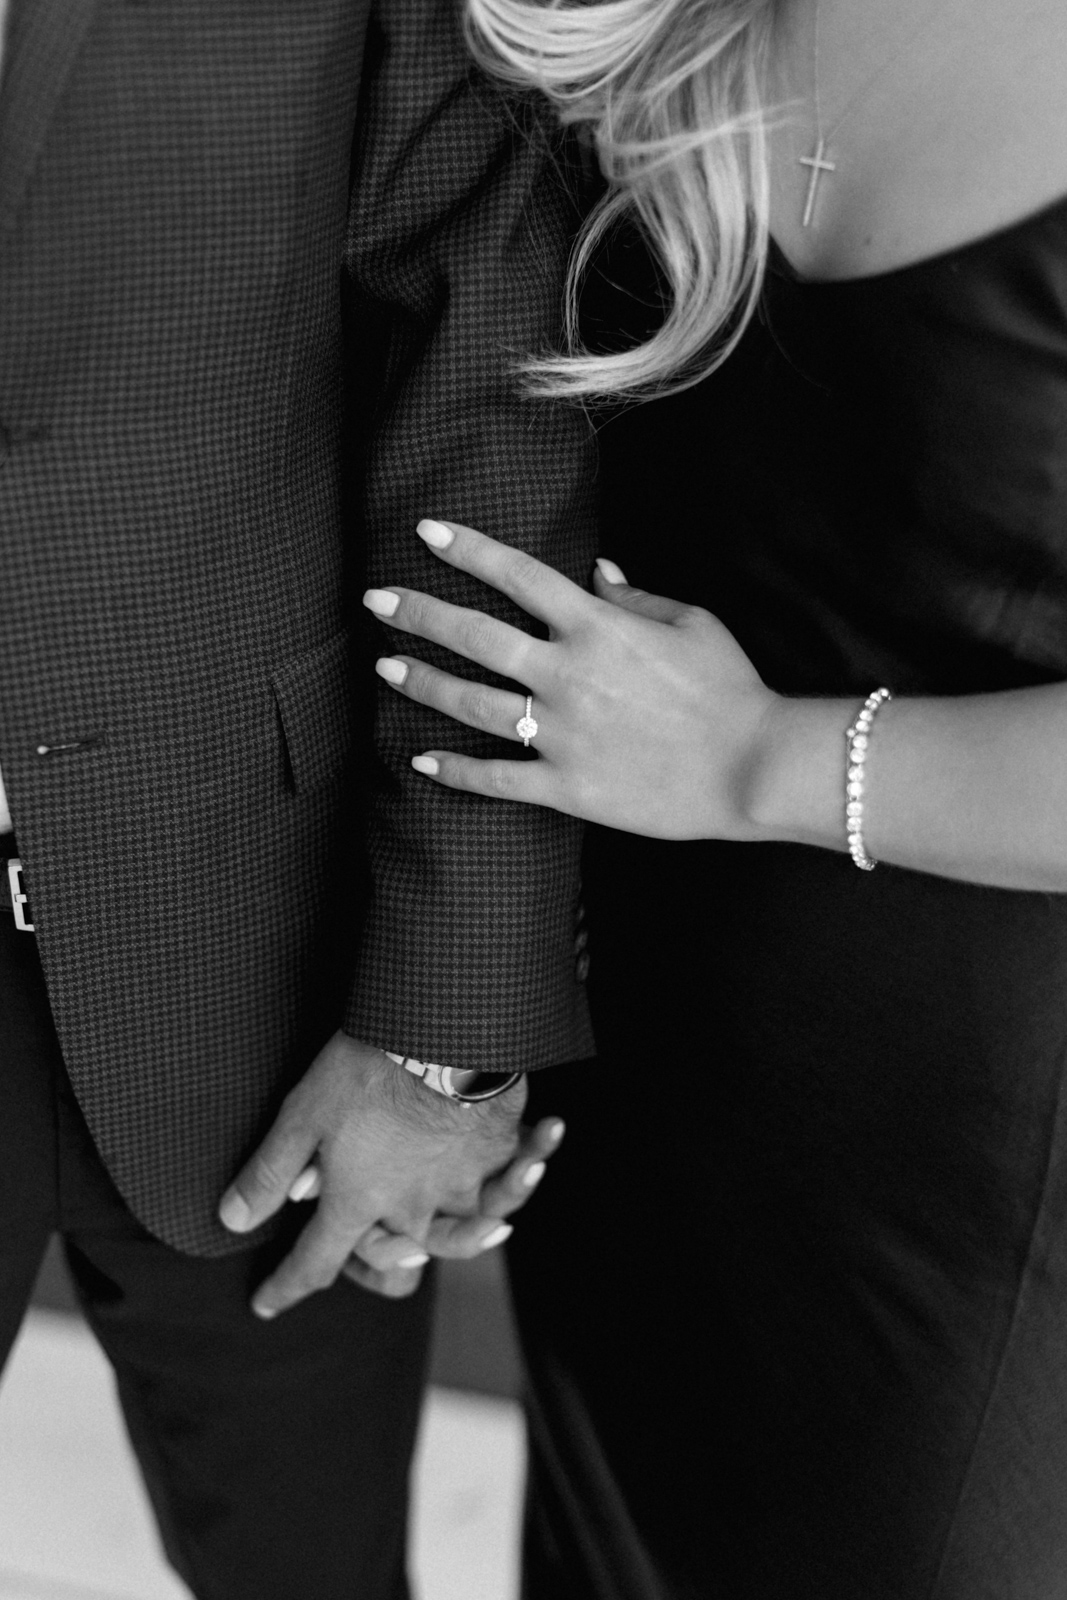 Black and white photo of an engagement ring that the fiance wears while gently holding her fiance's arm